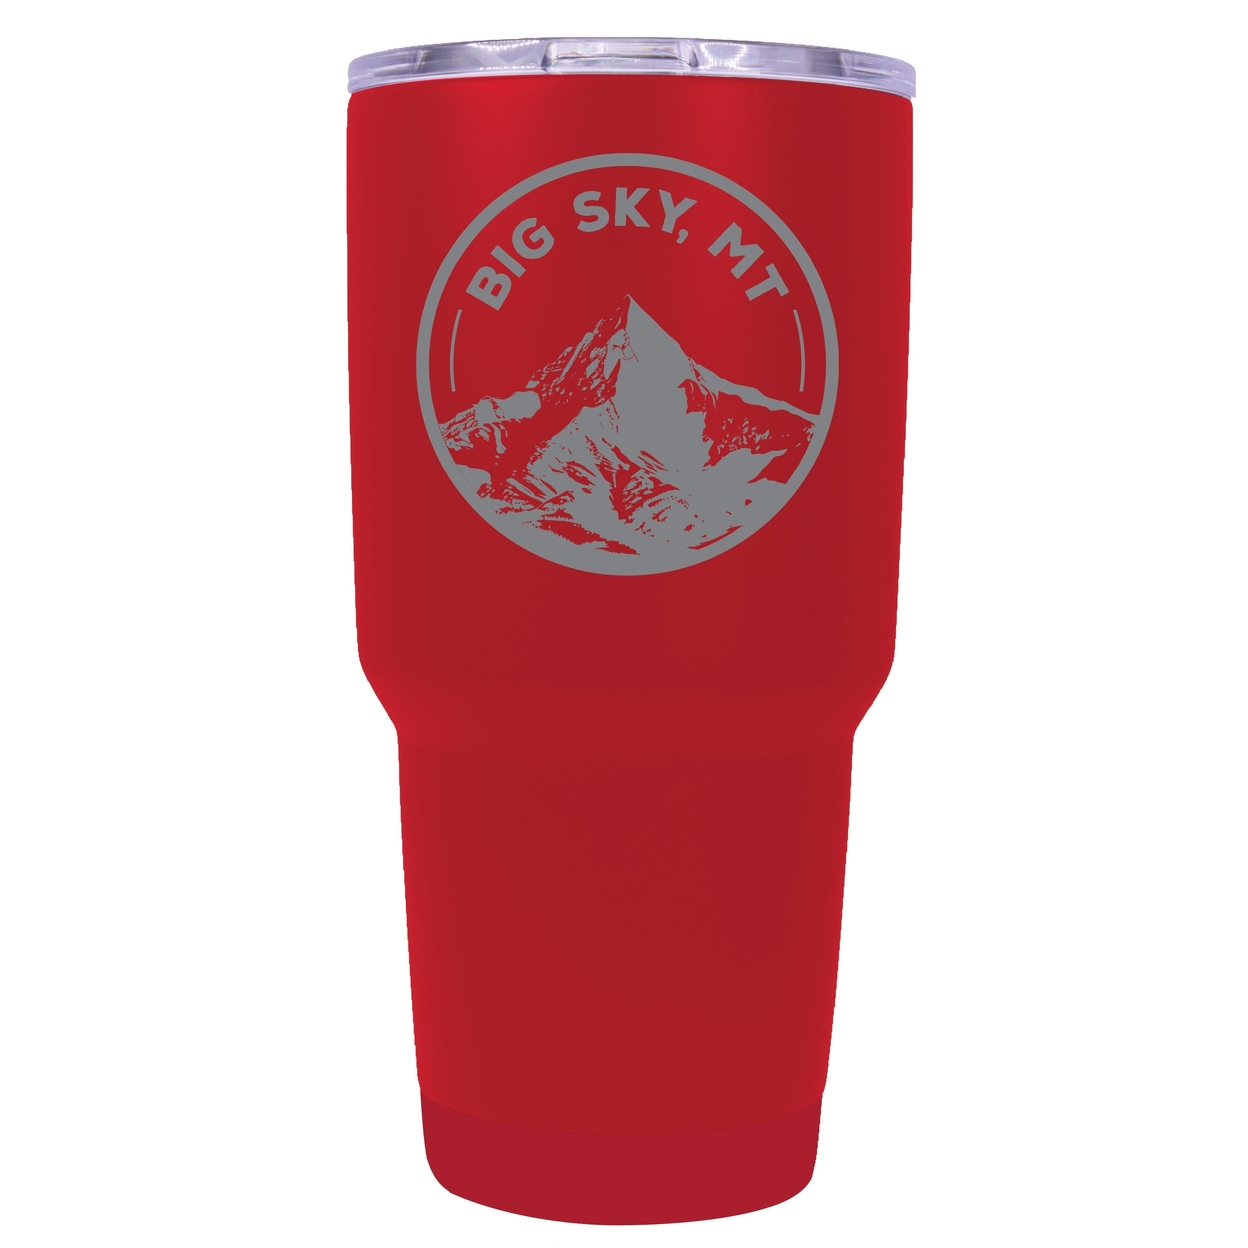 Big Sky Montana Souvenir 24 Oz Engraved Insulated Stainless Steel Tumbler - Coral,,Single Unit